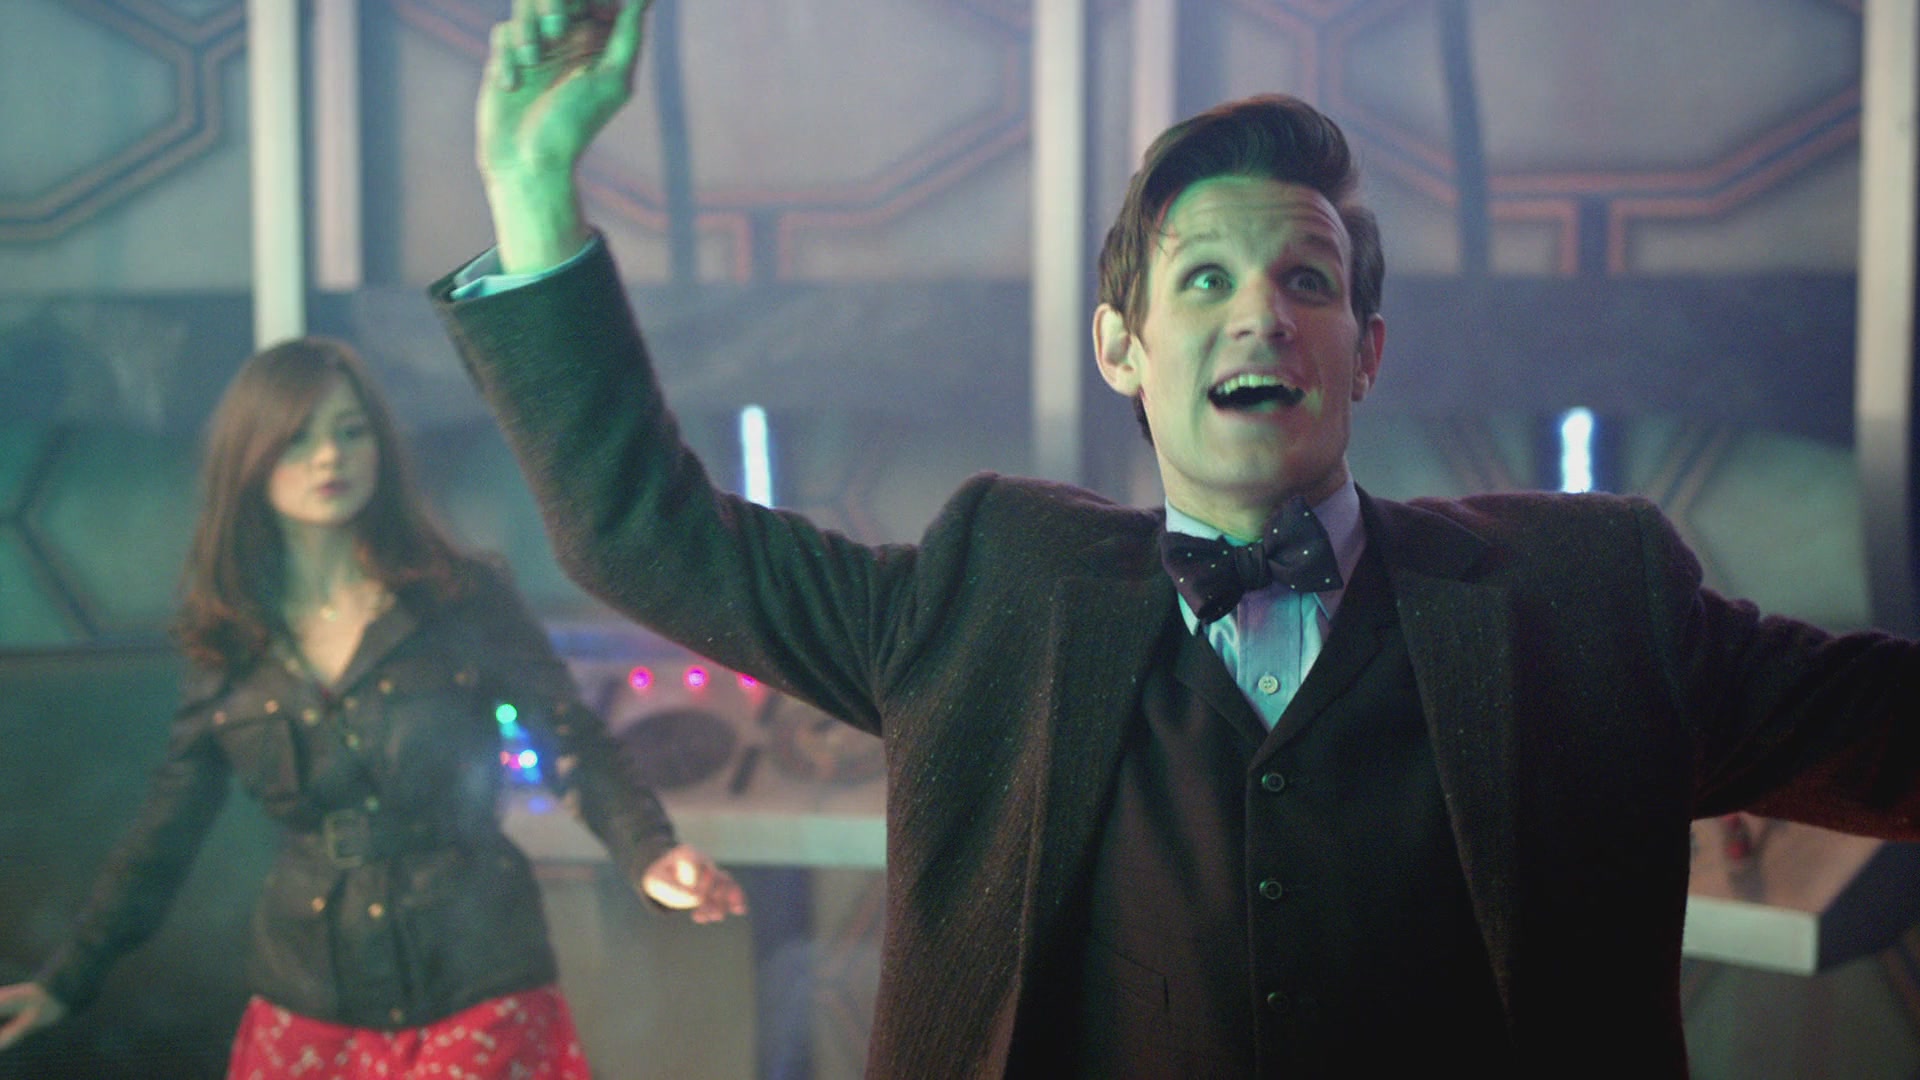 DayOfTheDoctor-Caps-0888.jpg